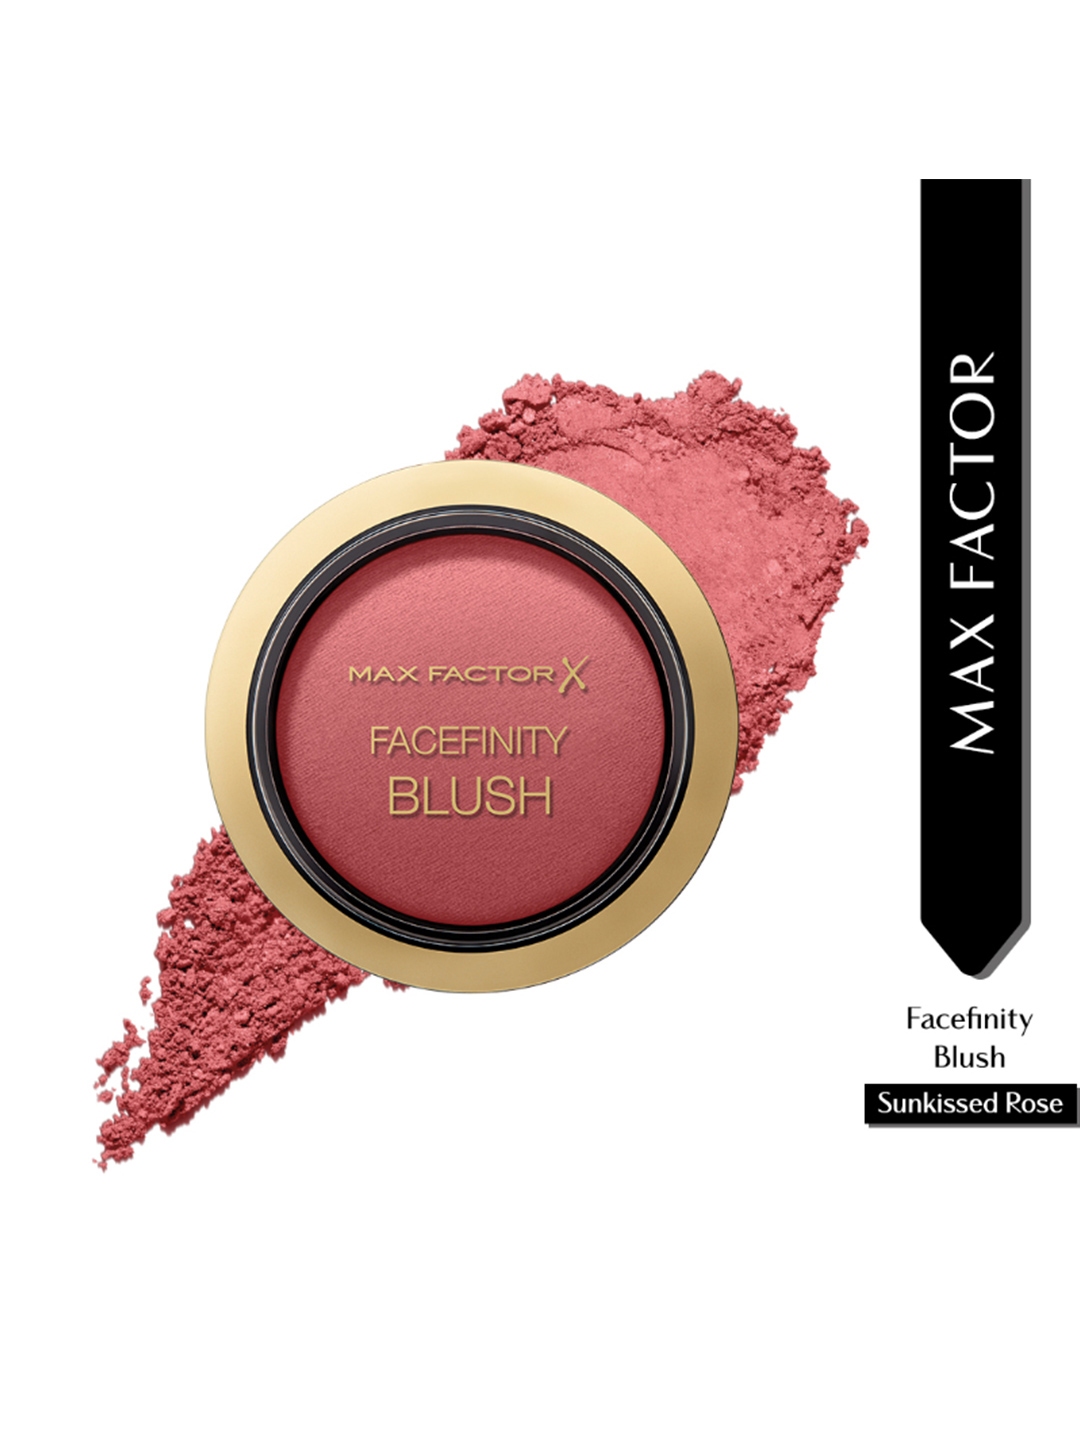 Revolution Beauty London Blusher Reloaded Blush, All-Day Wear, Highly  Pigmented and Buildable, Ballerina, 7.5g